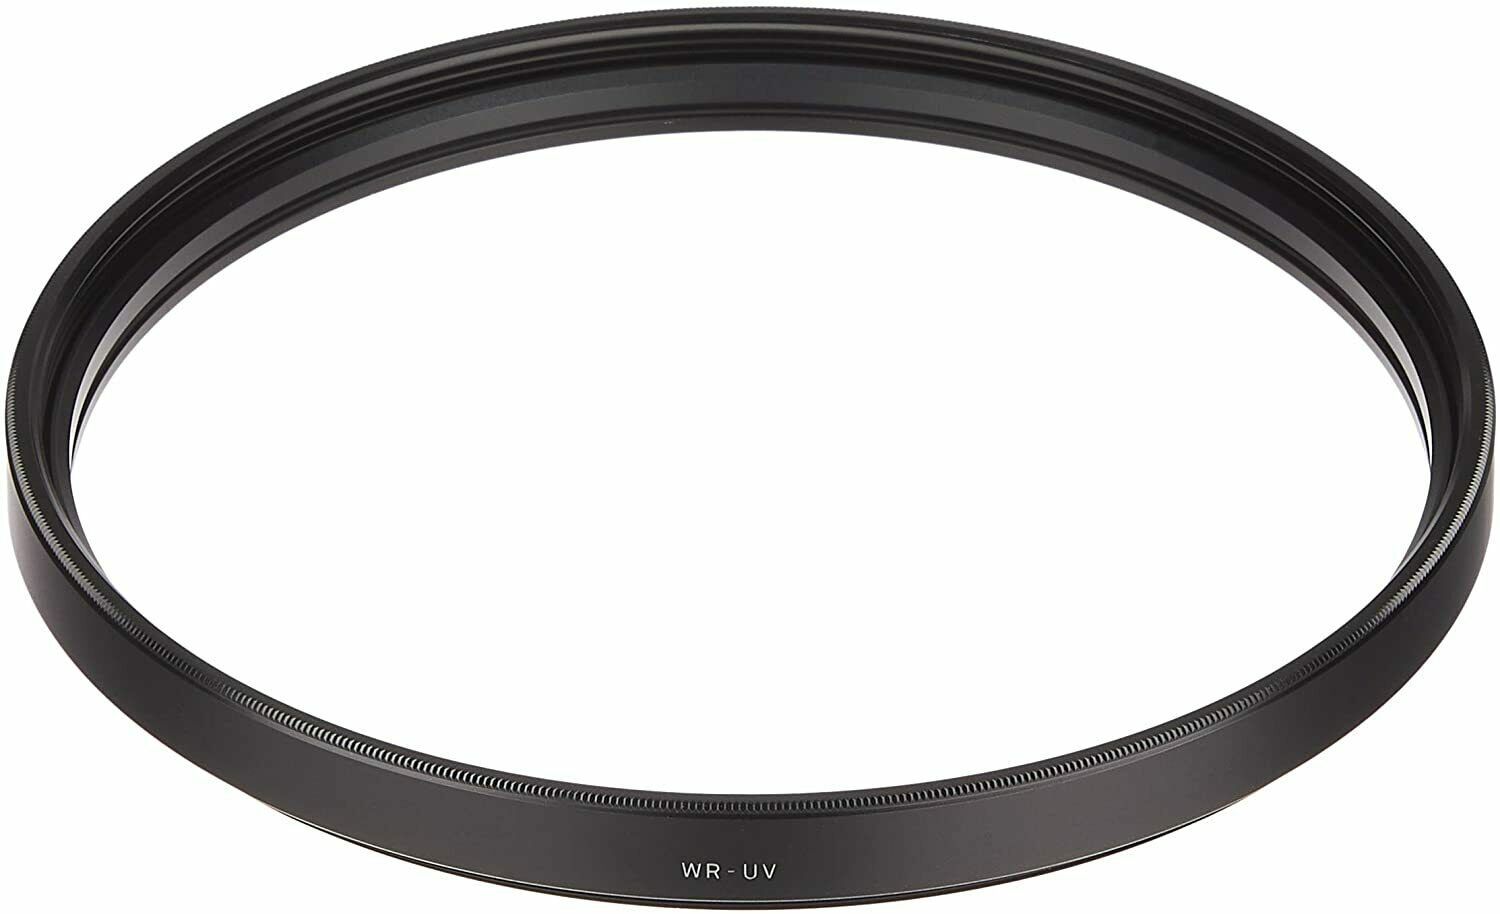 Product Image of Sigma 105mm WR UV Filter - Water & Oil repellent